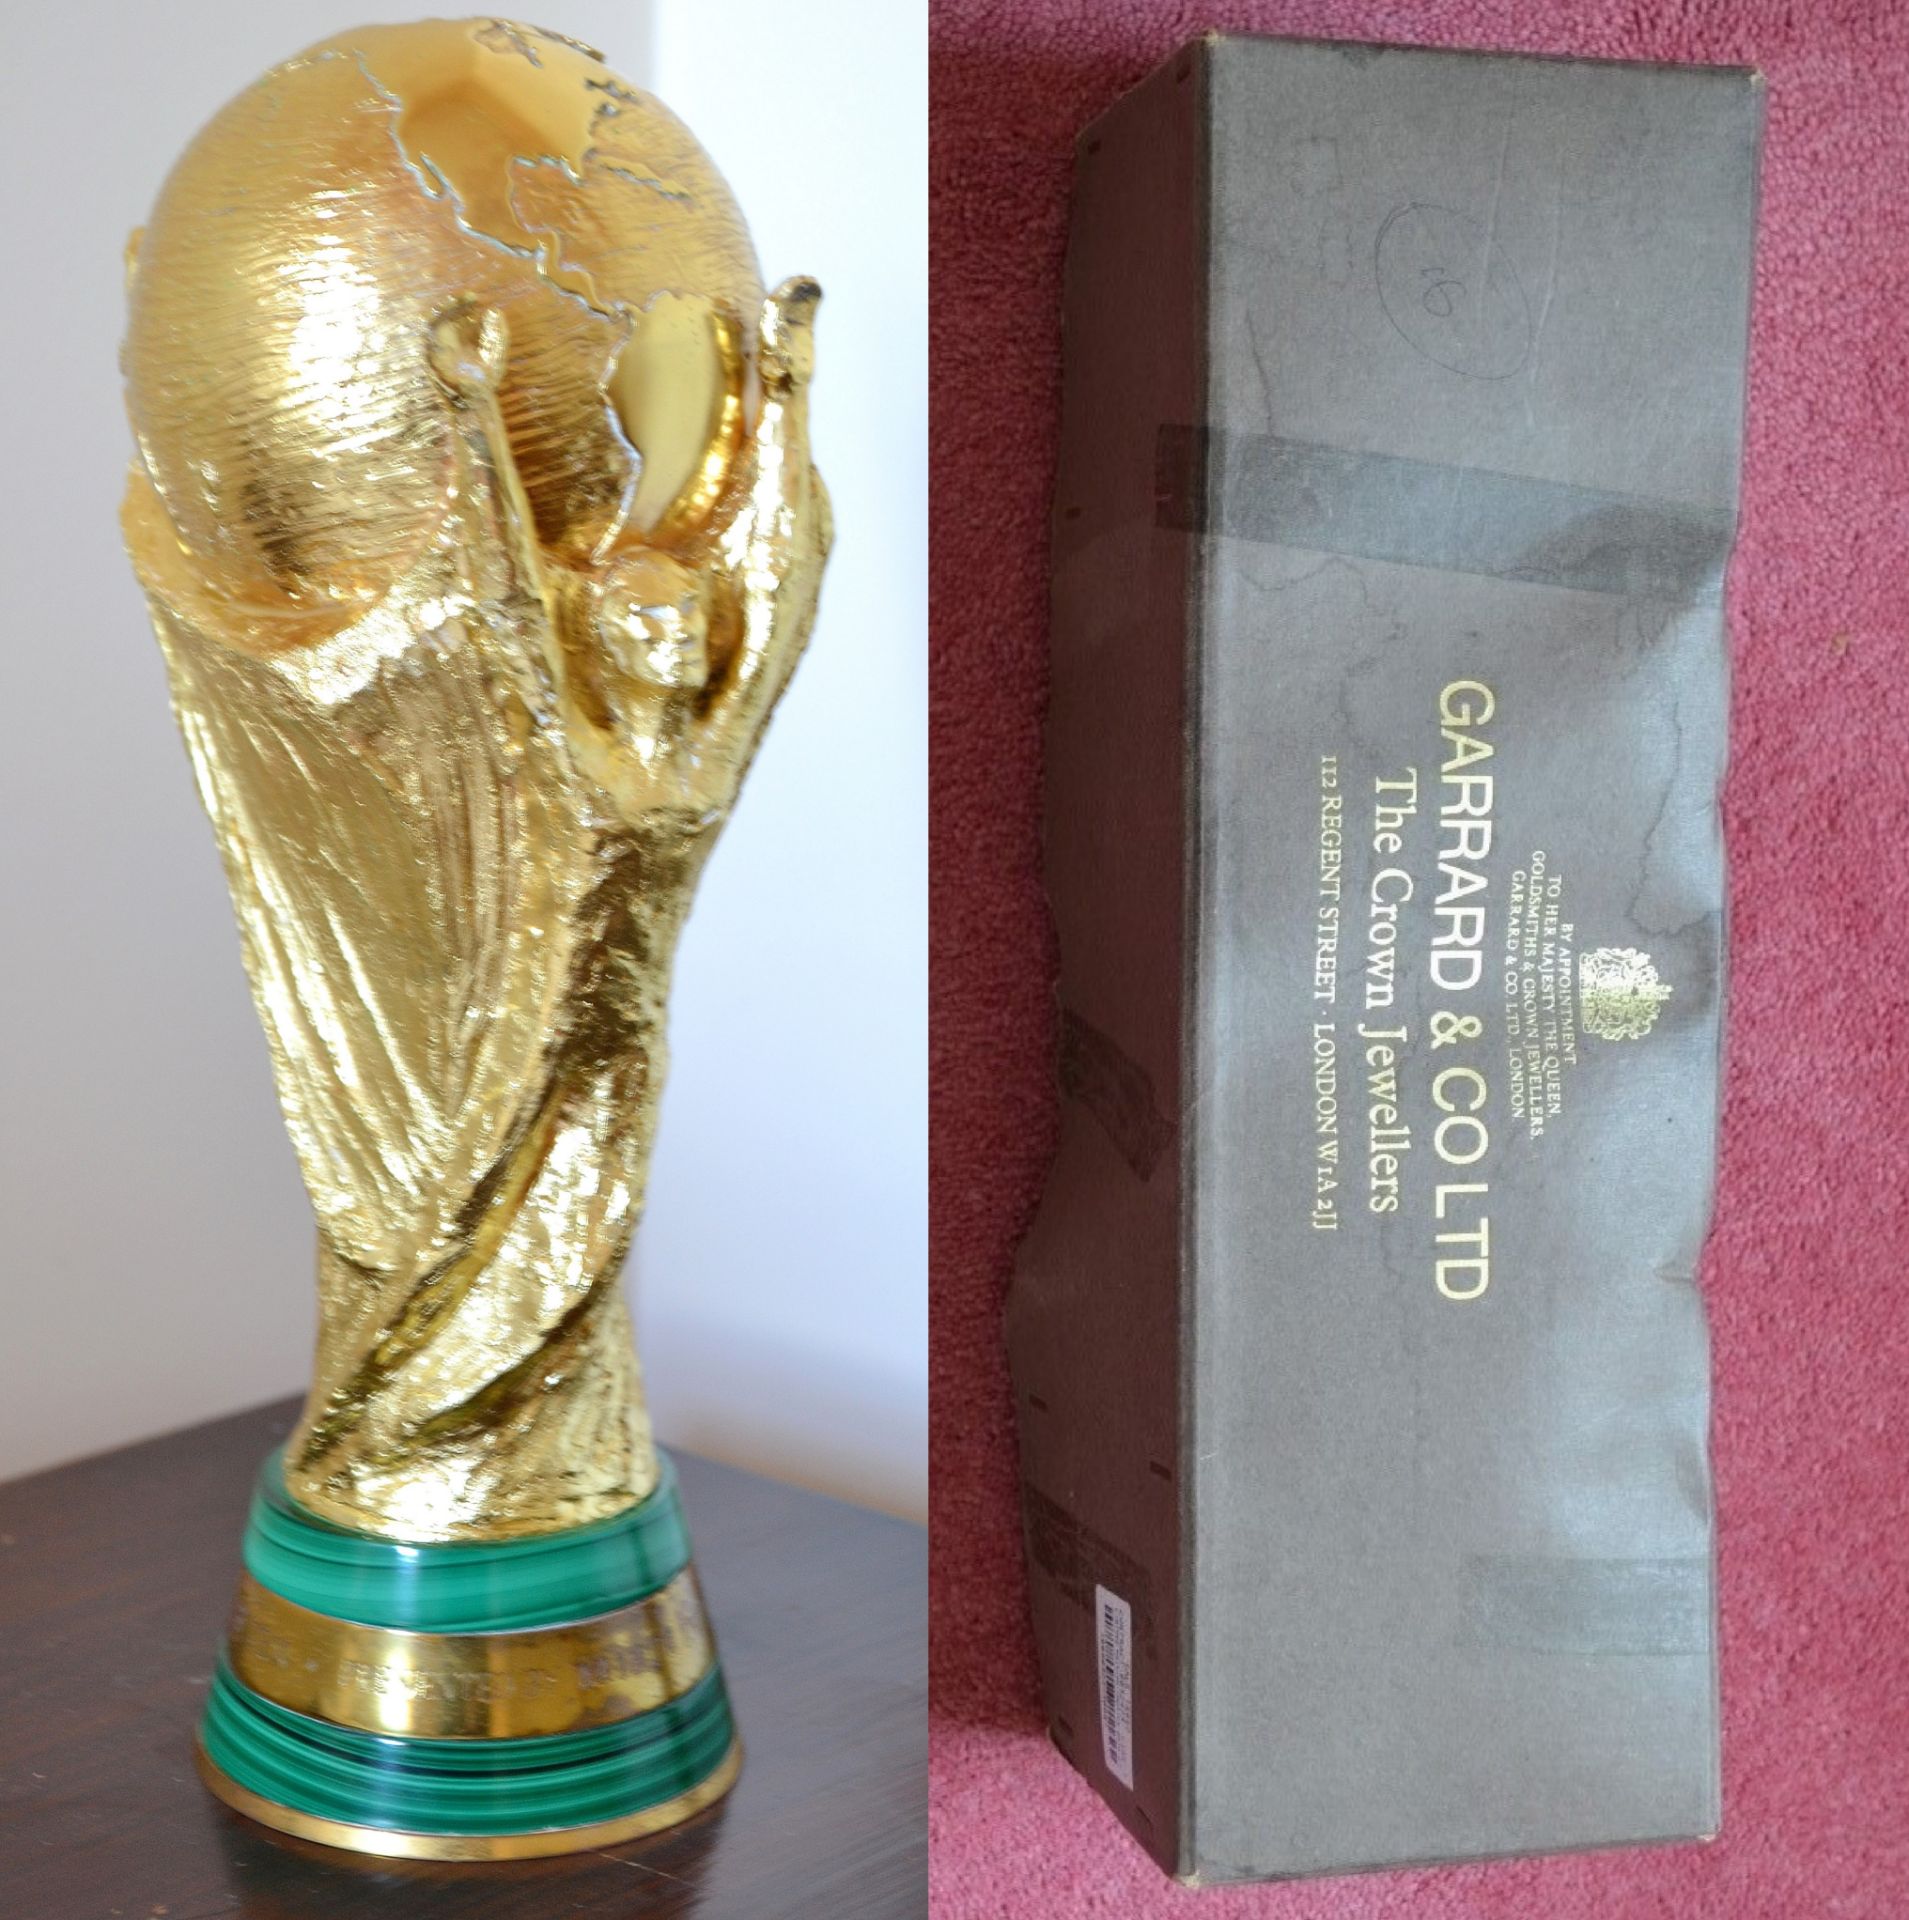 1 x Official World Cup 1:1.3 Scale 27cm Replica By Gerrard & Co. - Gold Plated - No.8 Of Only 10